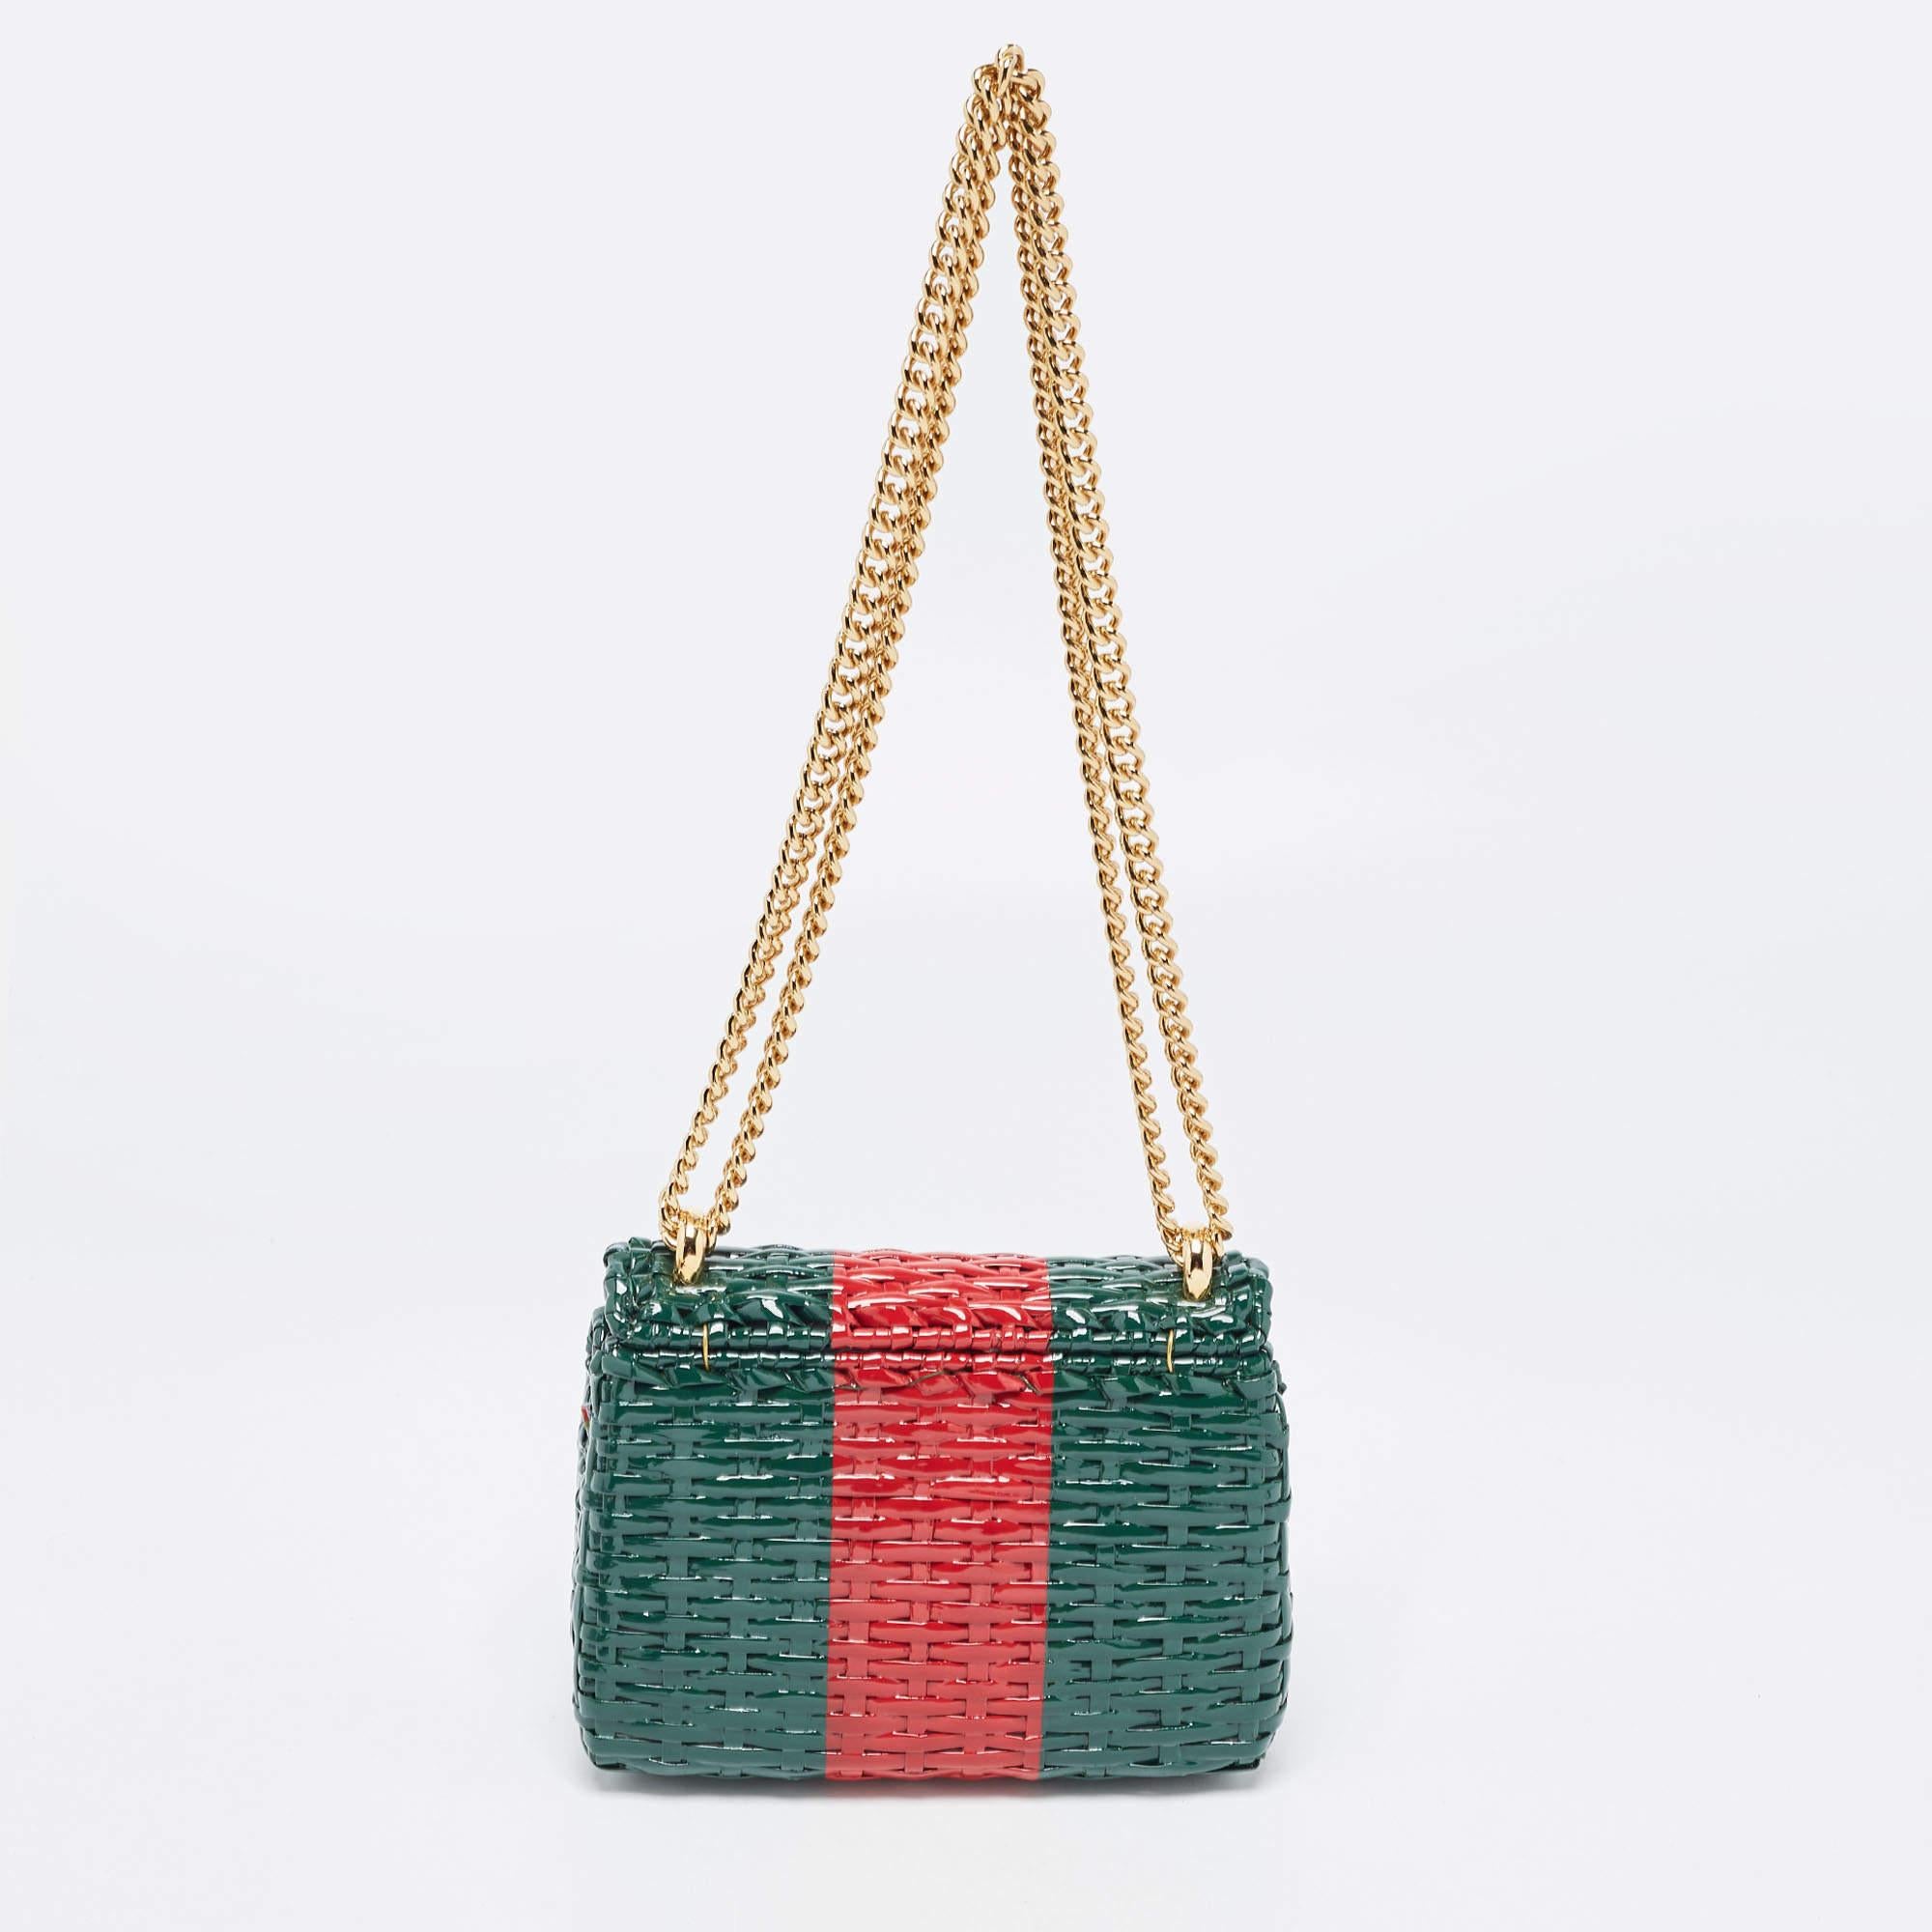 If you are looking for something that reflects chic and luxury, then this Gucci bag is a perfect choice. Crafted from premium materials, it can be conveniently carried around, and its interior is spaciously sized to house your belongings with